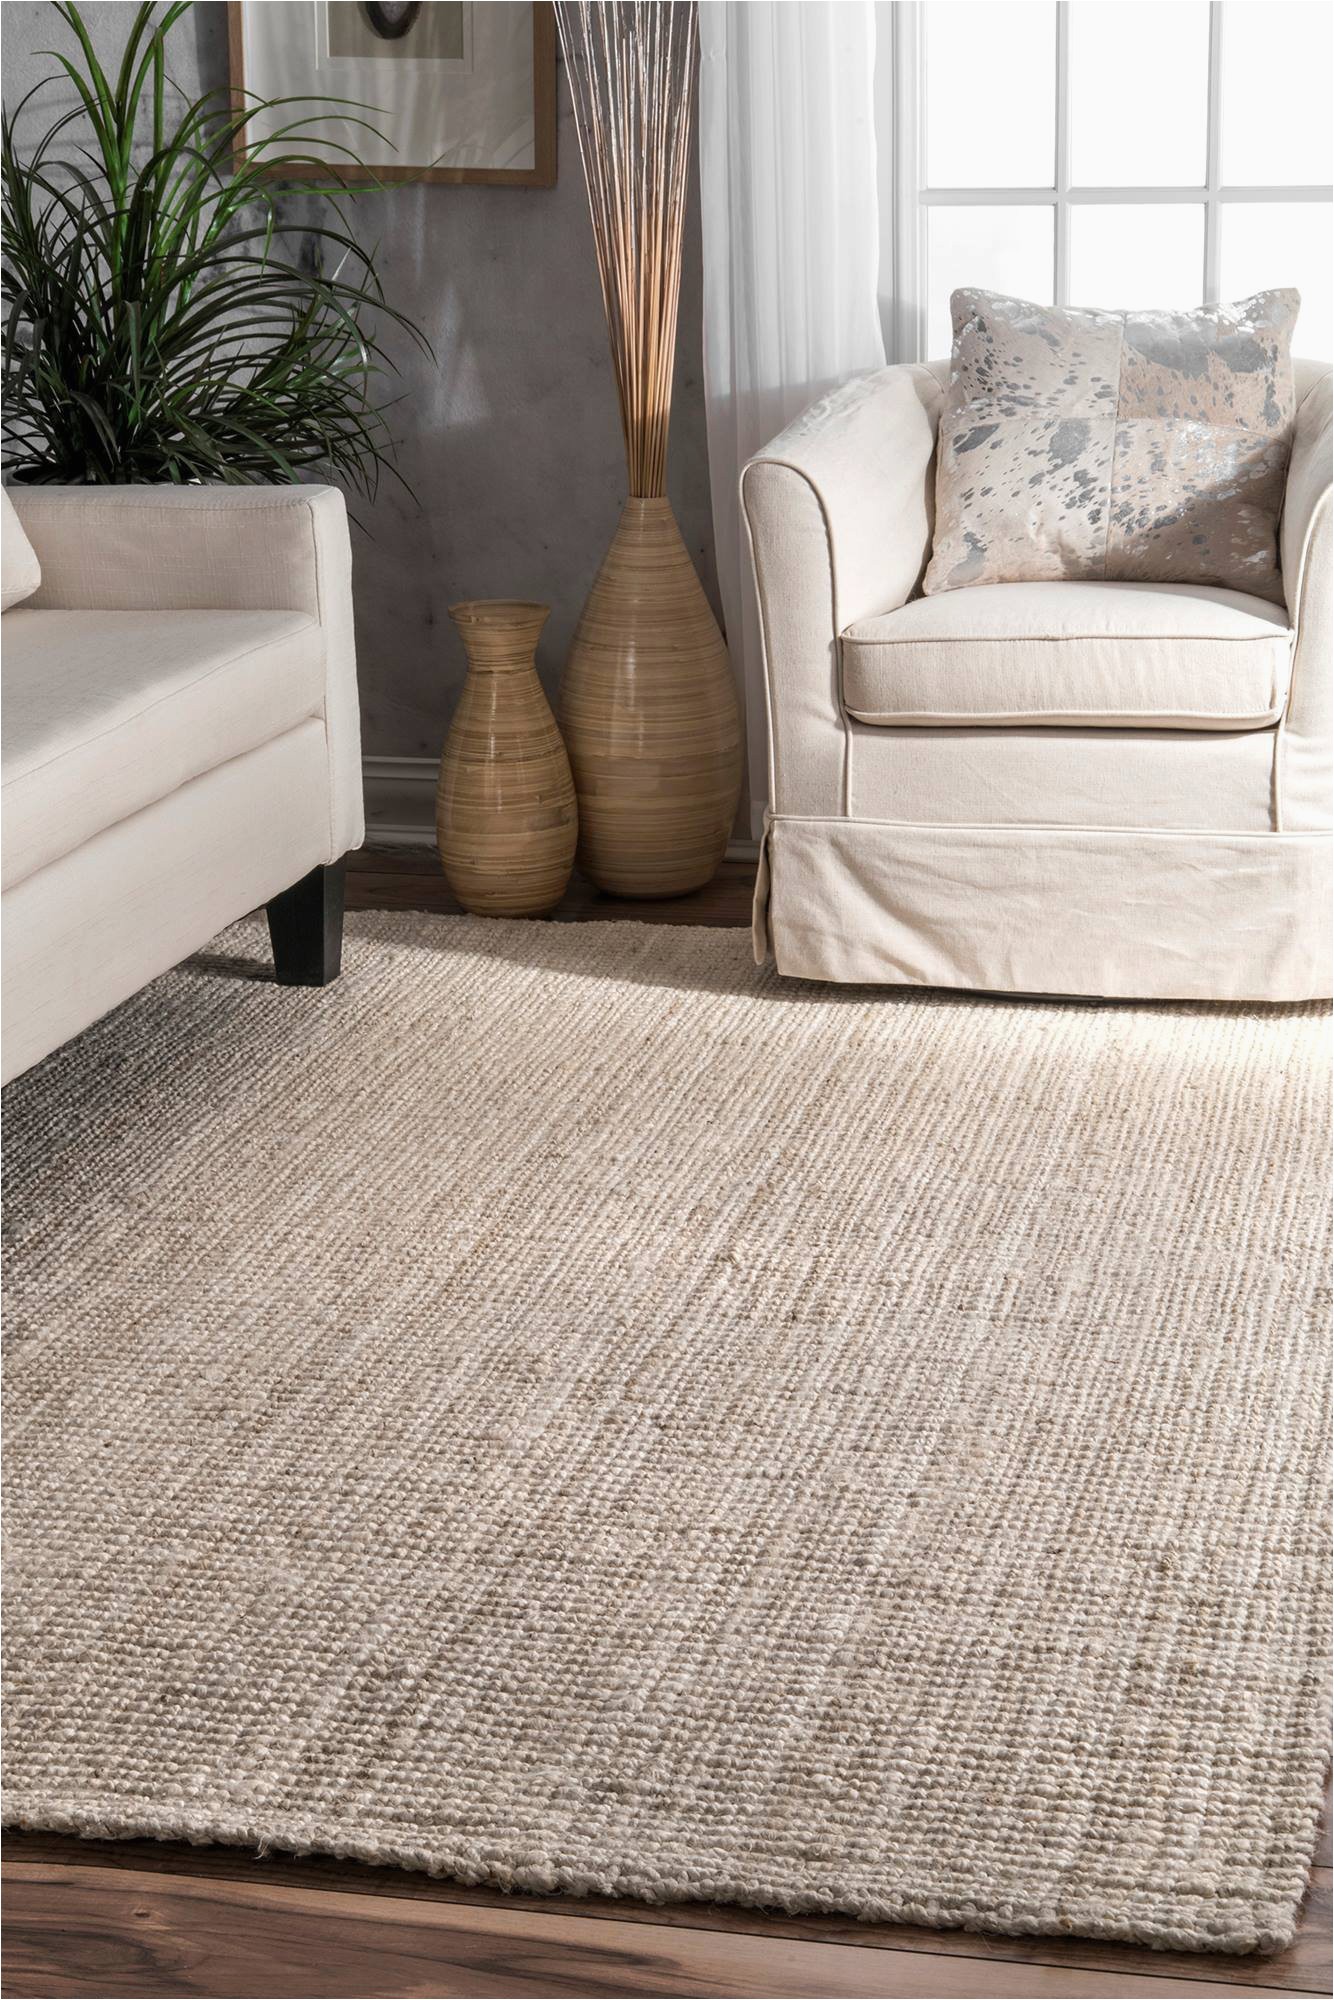 Solid Off White area Rug Nuloom Clwa01b ashli solid Jute area Rug 3 X 5 F White